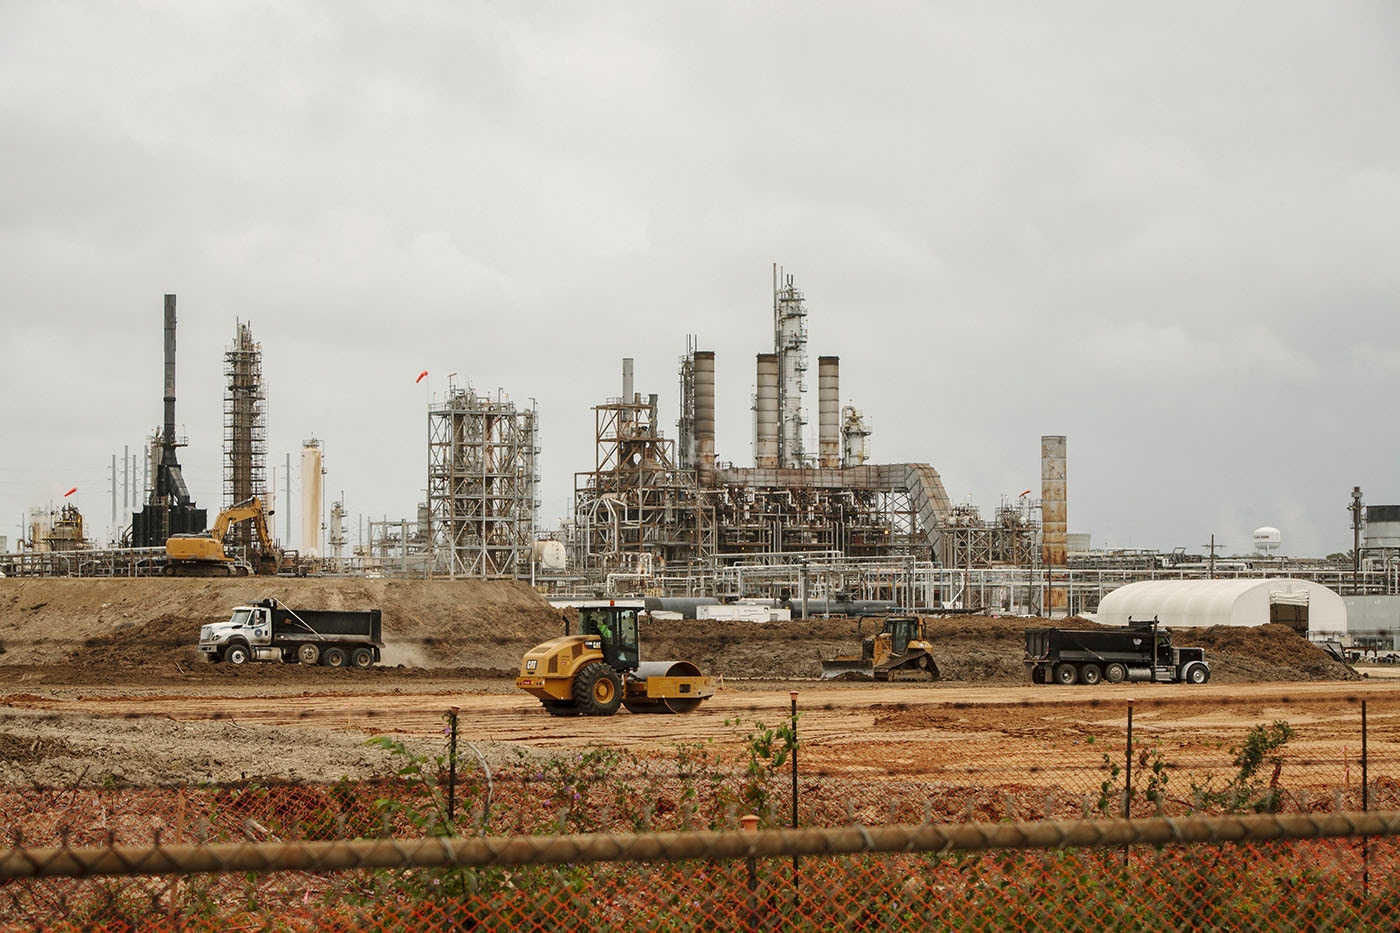 The Sasol plant is rapidly expanding across acres of land that were once part of the tiny towns of Westlake and Mossville, La., Oct. 23, 2015.